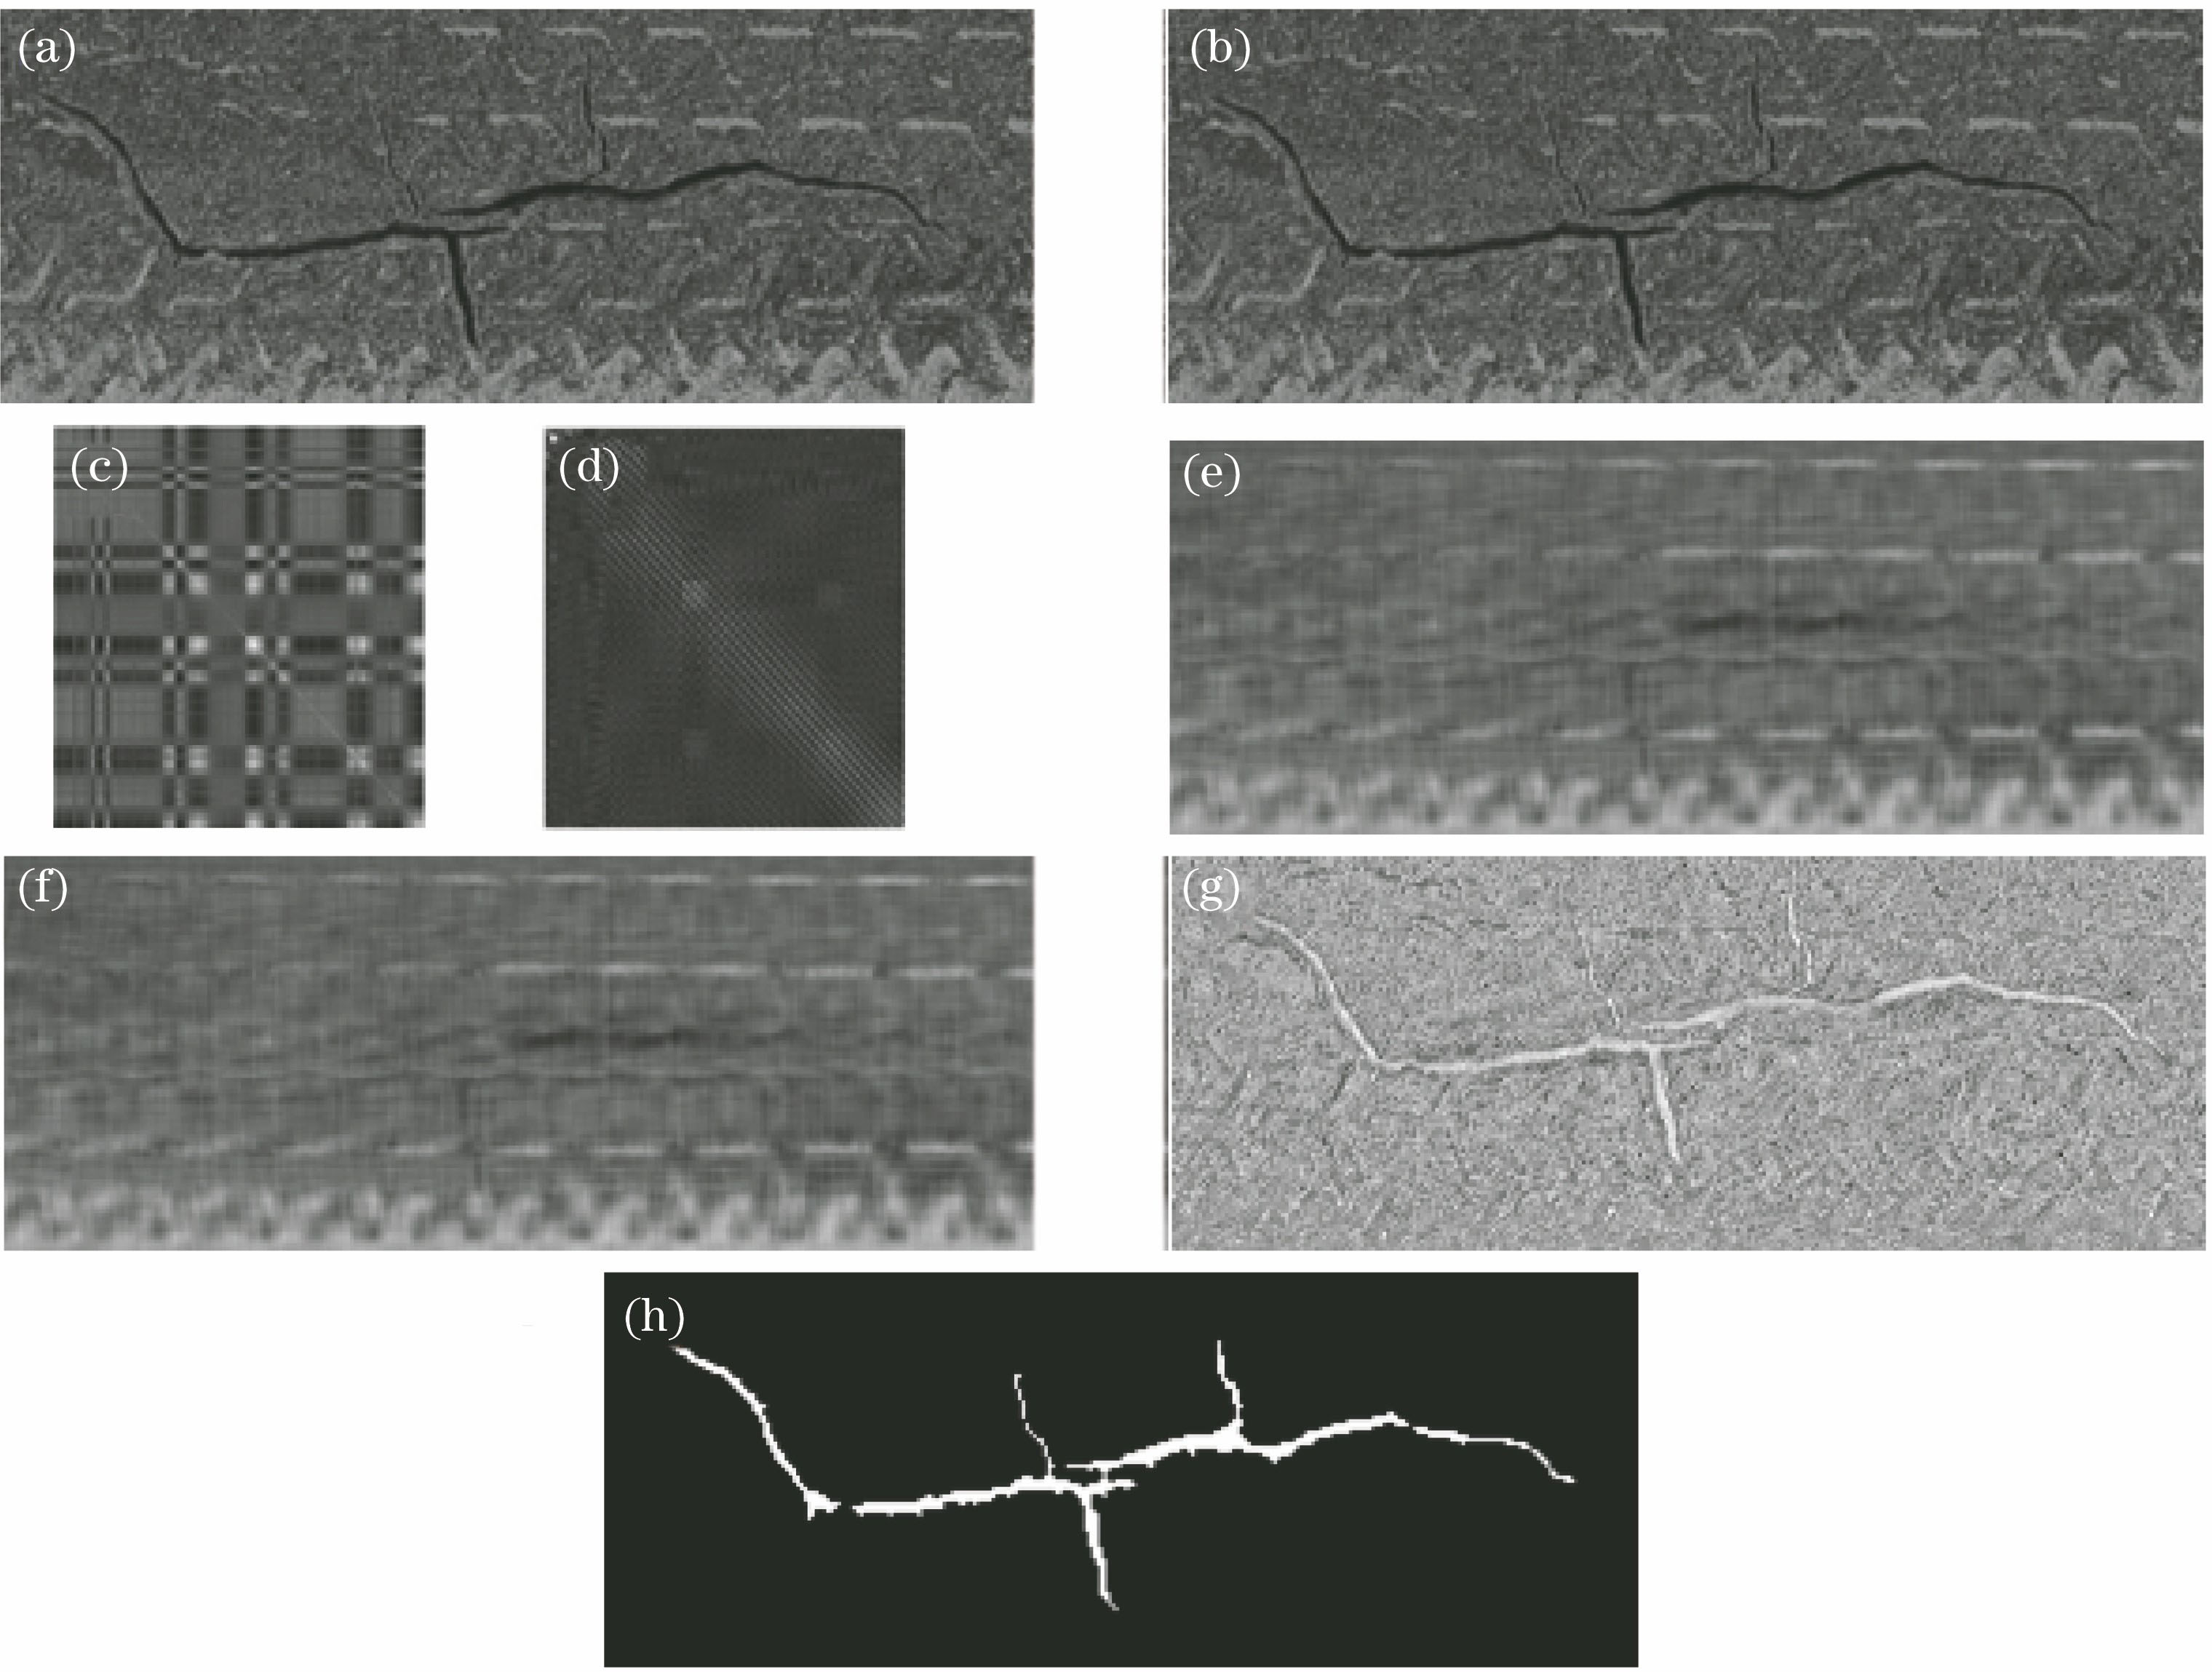 Process of surface crack detection of ceramic tile based on PCA method. (a) Red channel image of ceramic tile; (b) results of sample centralization; (c) covariance matrix of centralization matrix displays with two-dimensional image; (d) projection matrix displays with two-dimensional image; (e) dimension-reduced post-sample matrix displays with two-dimensional image; (f) reconstruction of h=20; (g) results of difference between graph (f) and graph (a); (h) results of crack detection